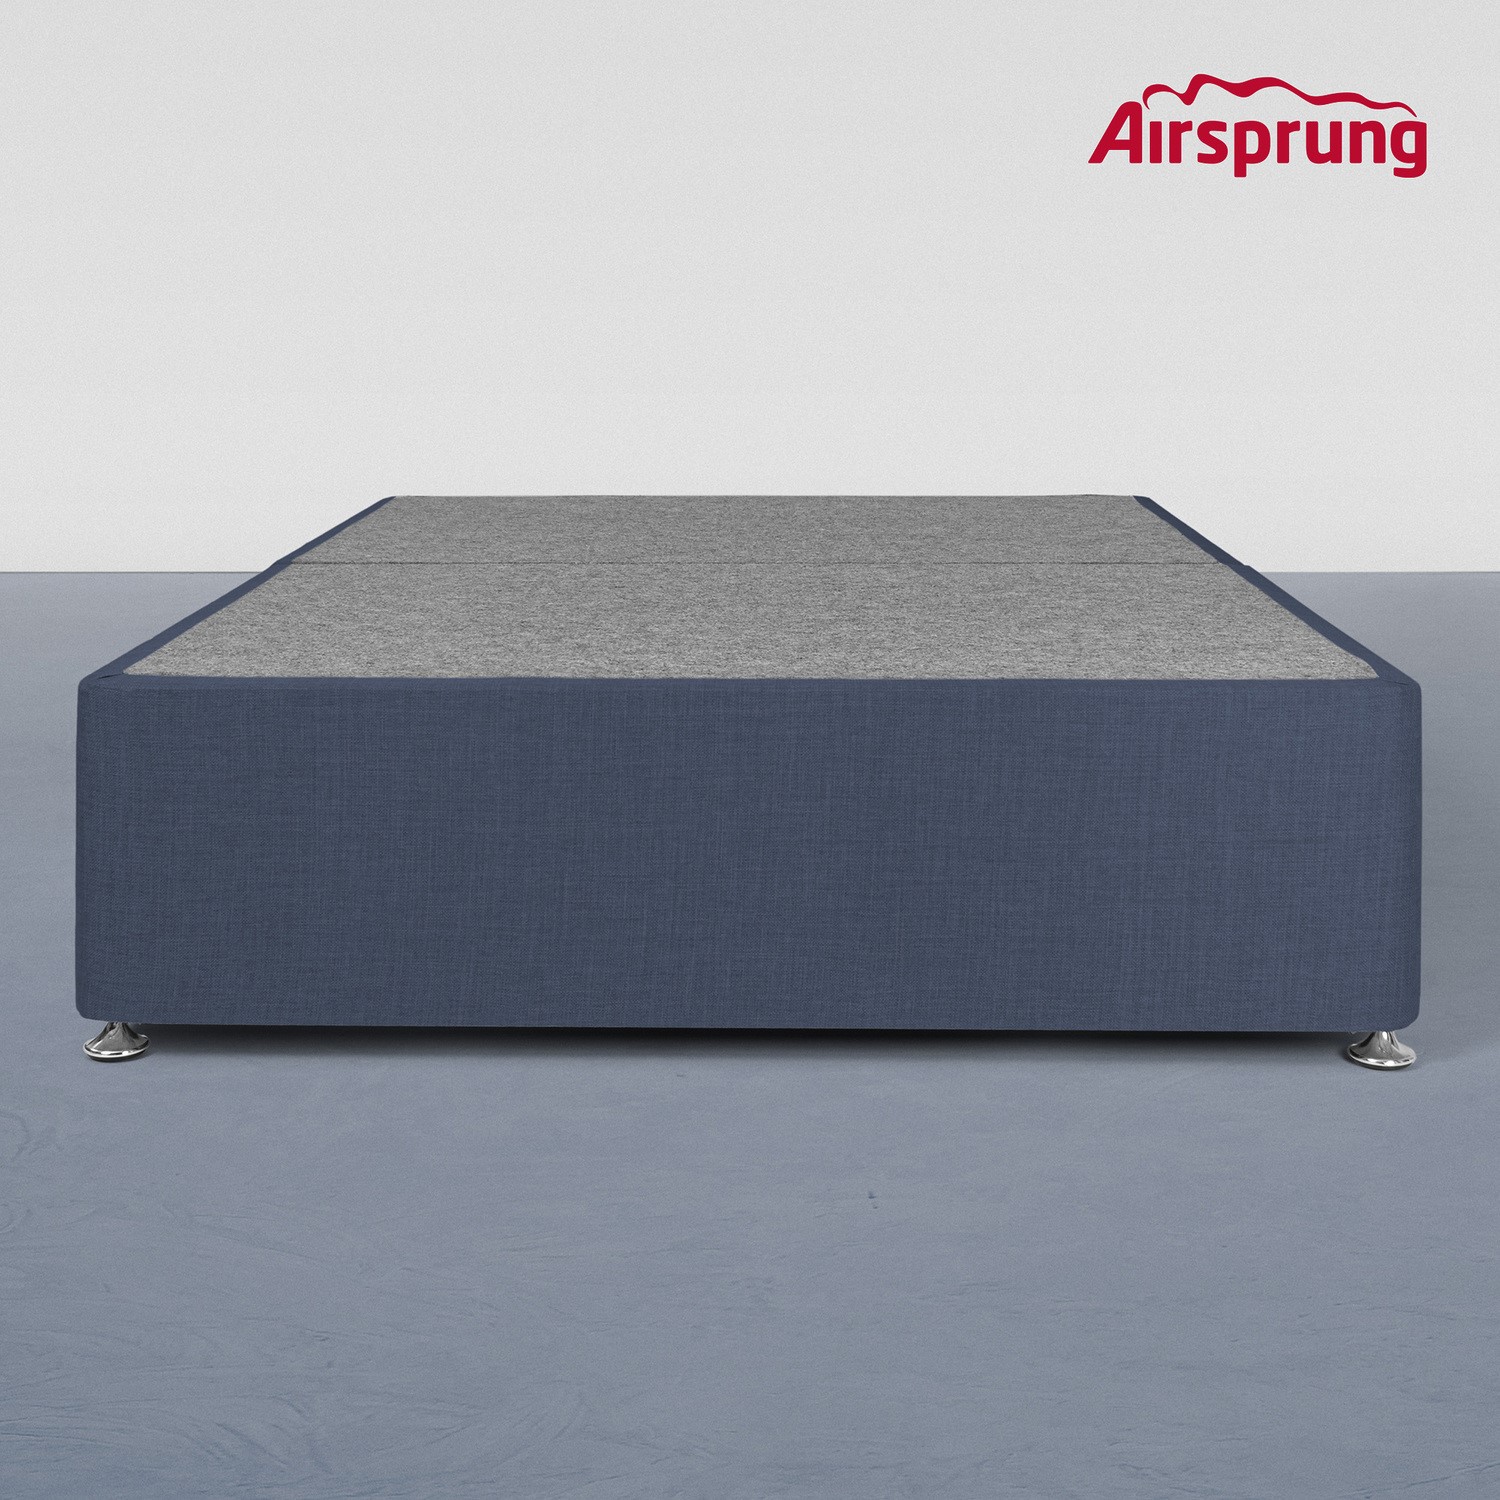 Read more about Airsprung kelston king size 4 drawer divan midnight blue